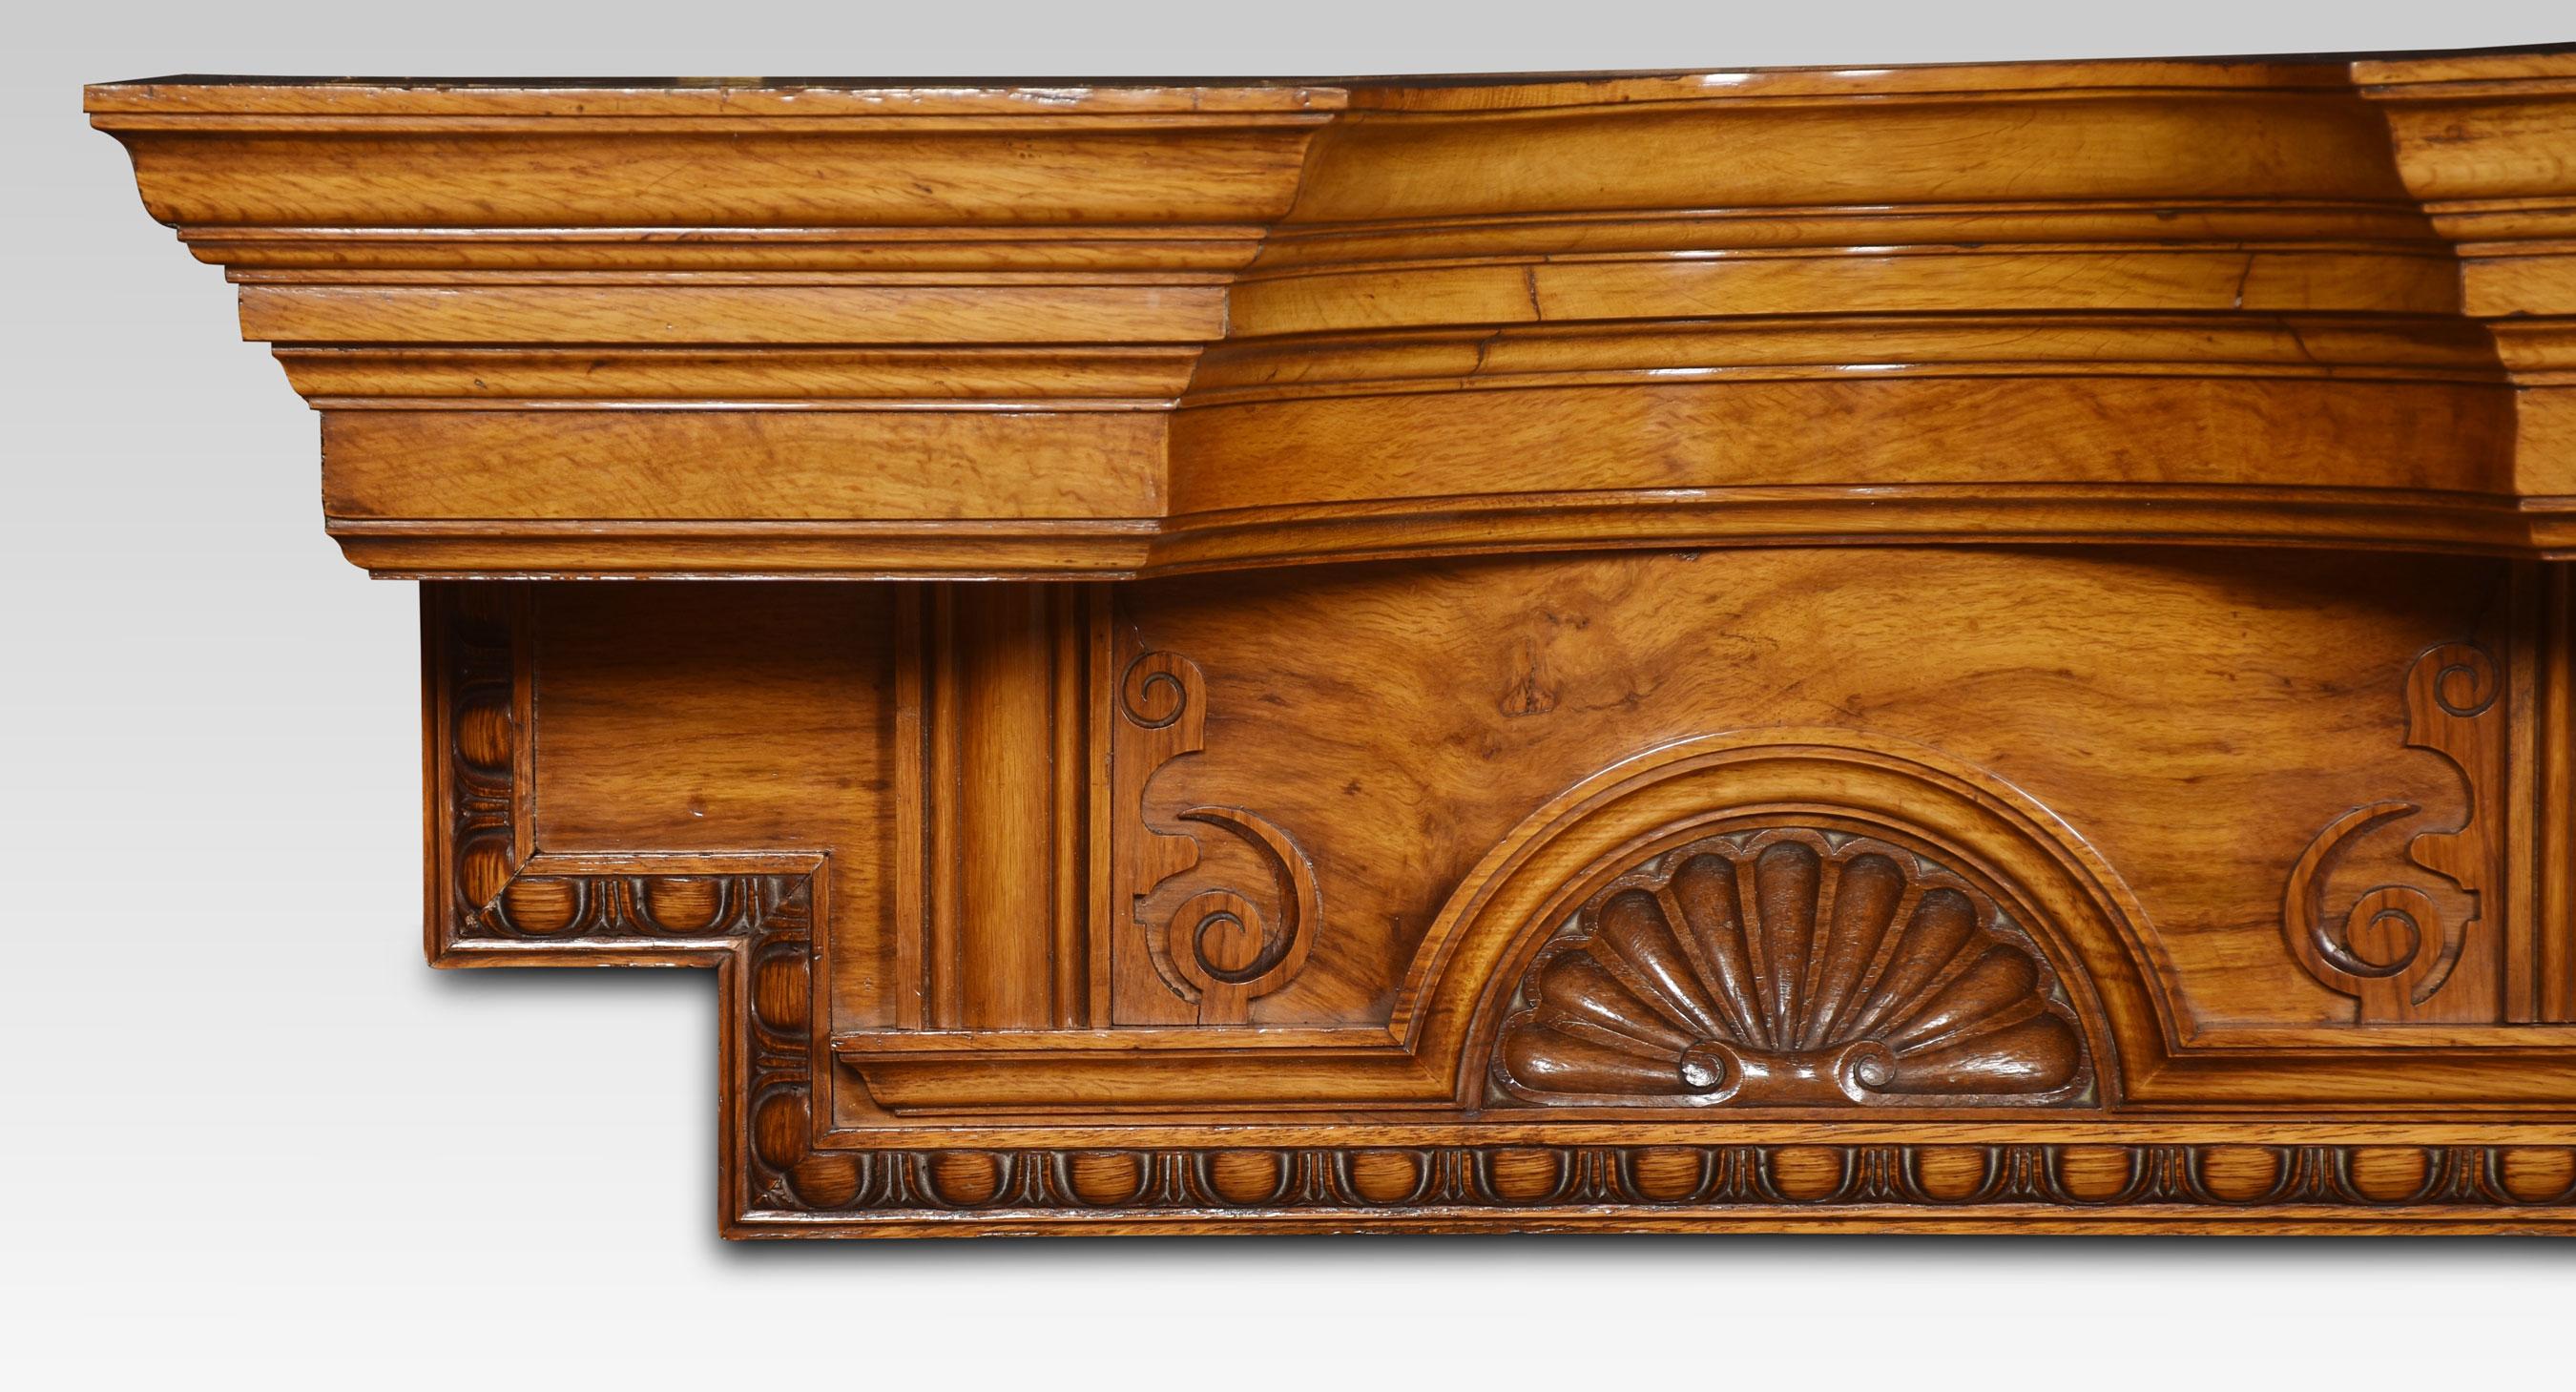 Pollard oak overdoor pediment the concaved top above shell carved cartouches flanked by scrolling decoration.
Dimensions
Height 14.5 Inches
Width 56 Inches
Depth 10 Inches.